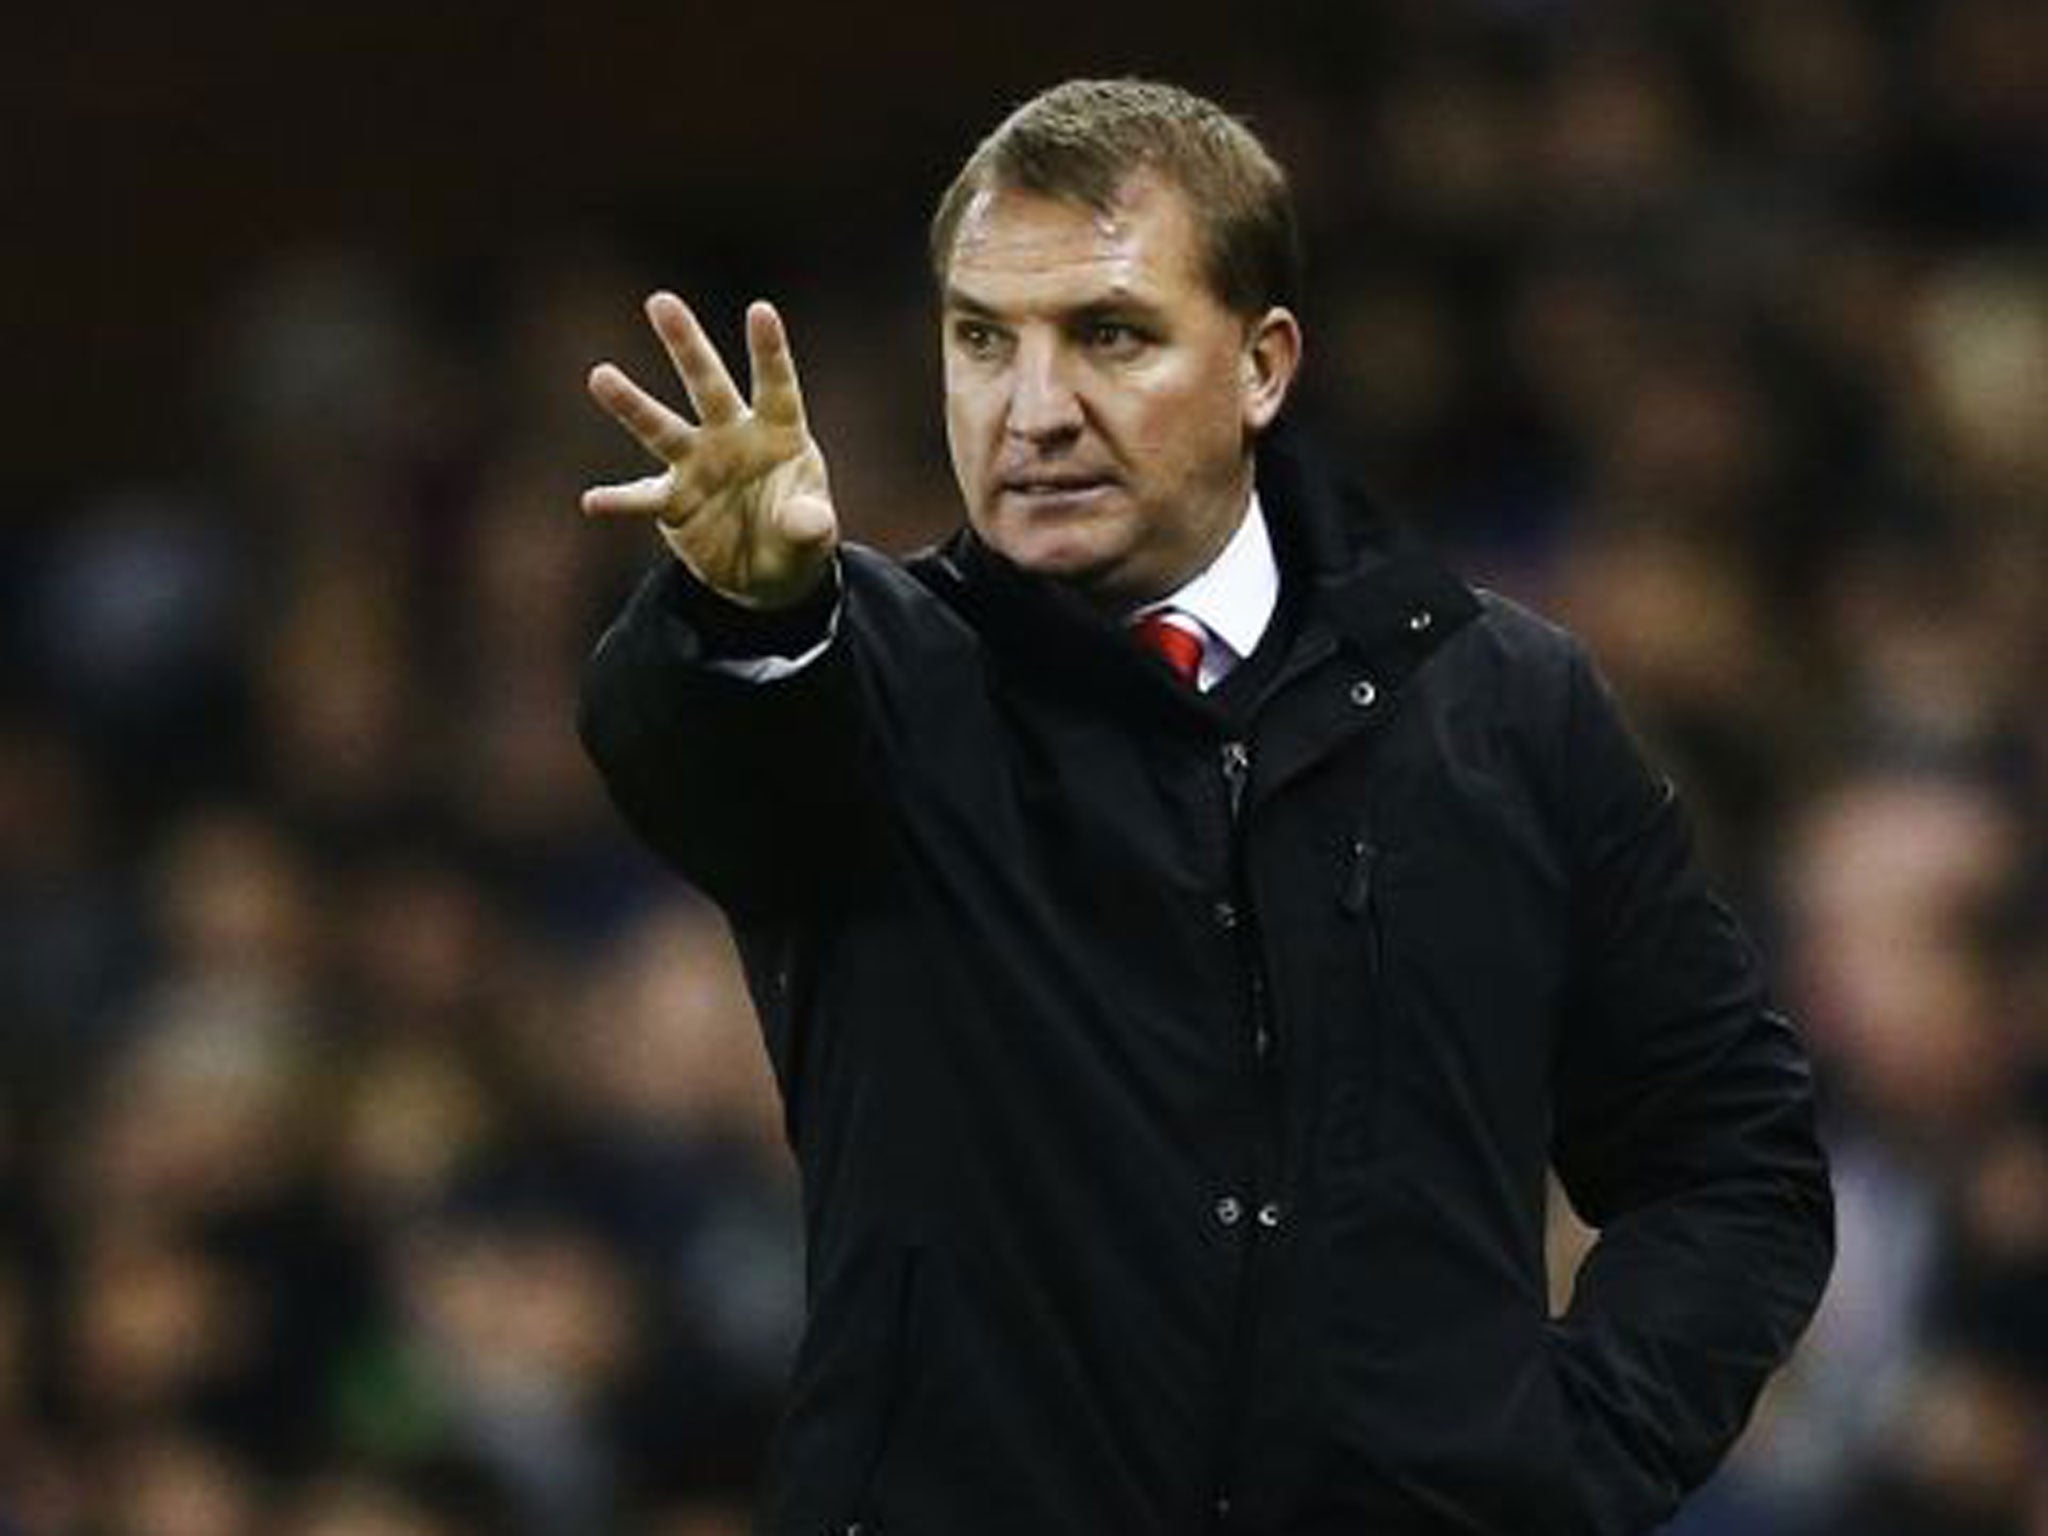 Brendan Rodgers will attempt to strengthen his squad in January